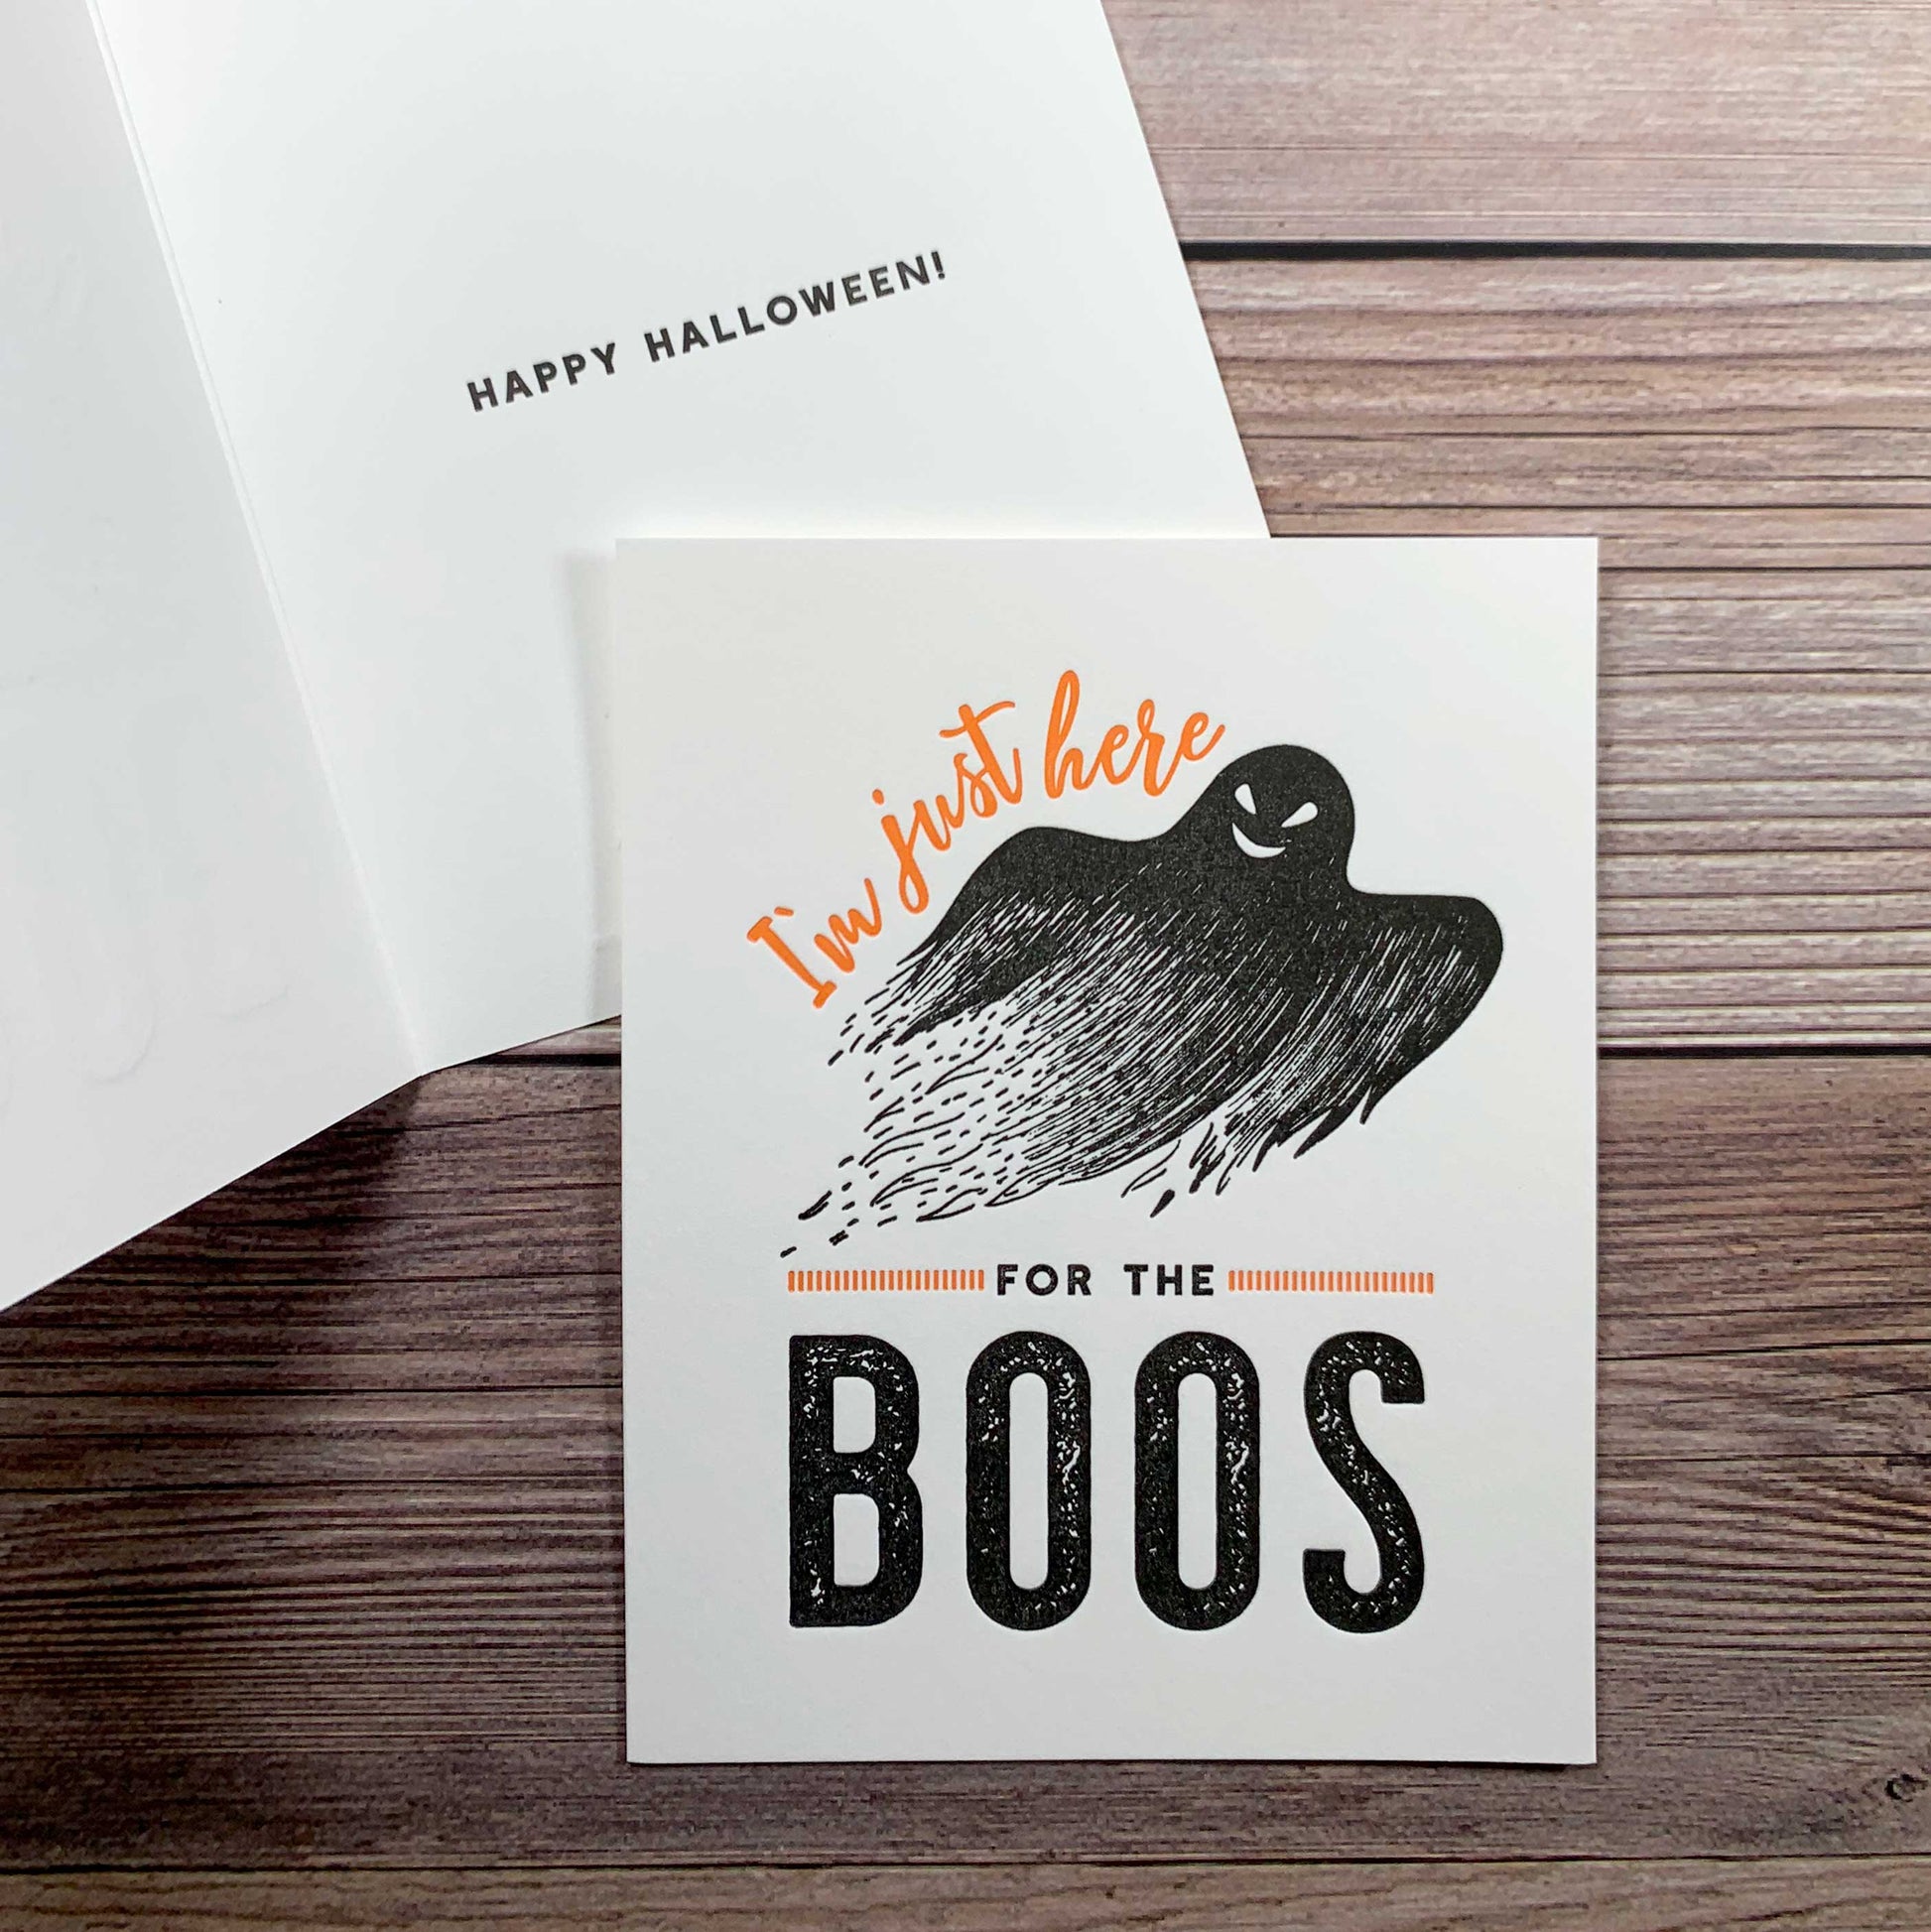 I'm just here for the BOOS, Inside message: Happy Halloween, greeting card, Letterpress printed, includes envelope